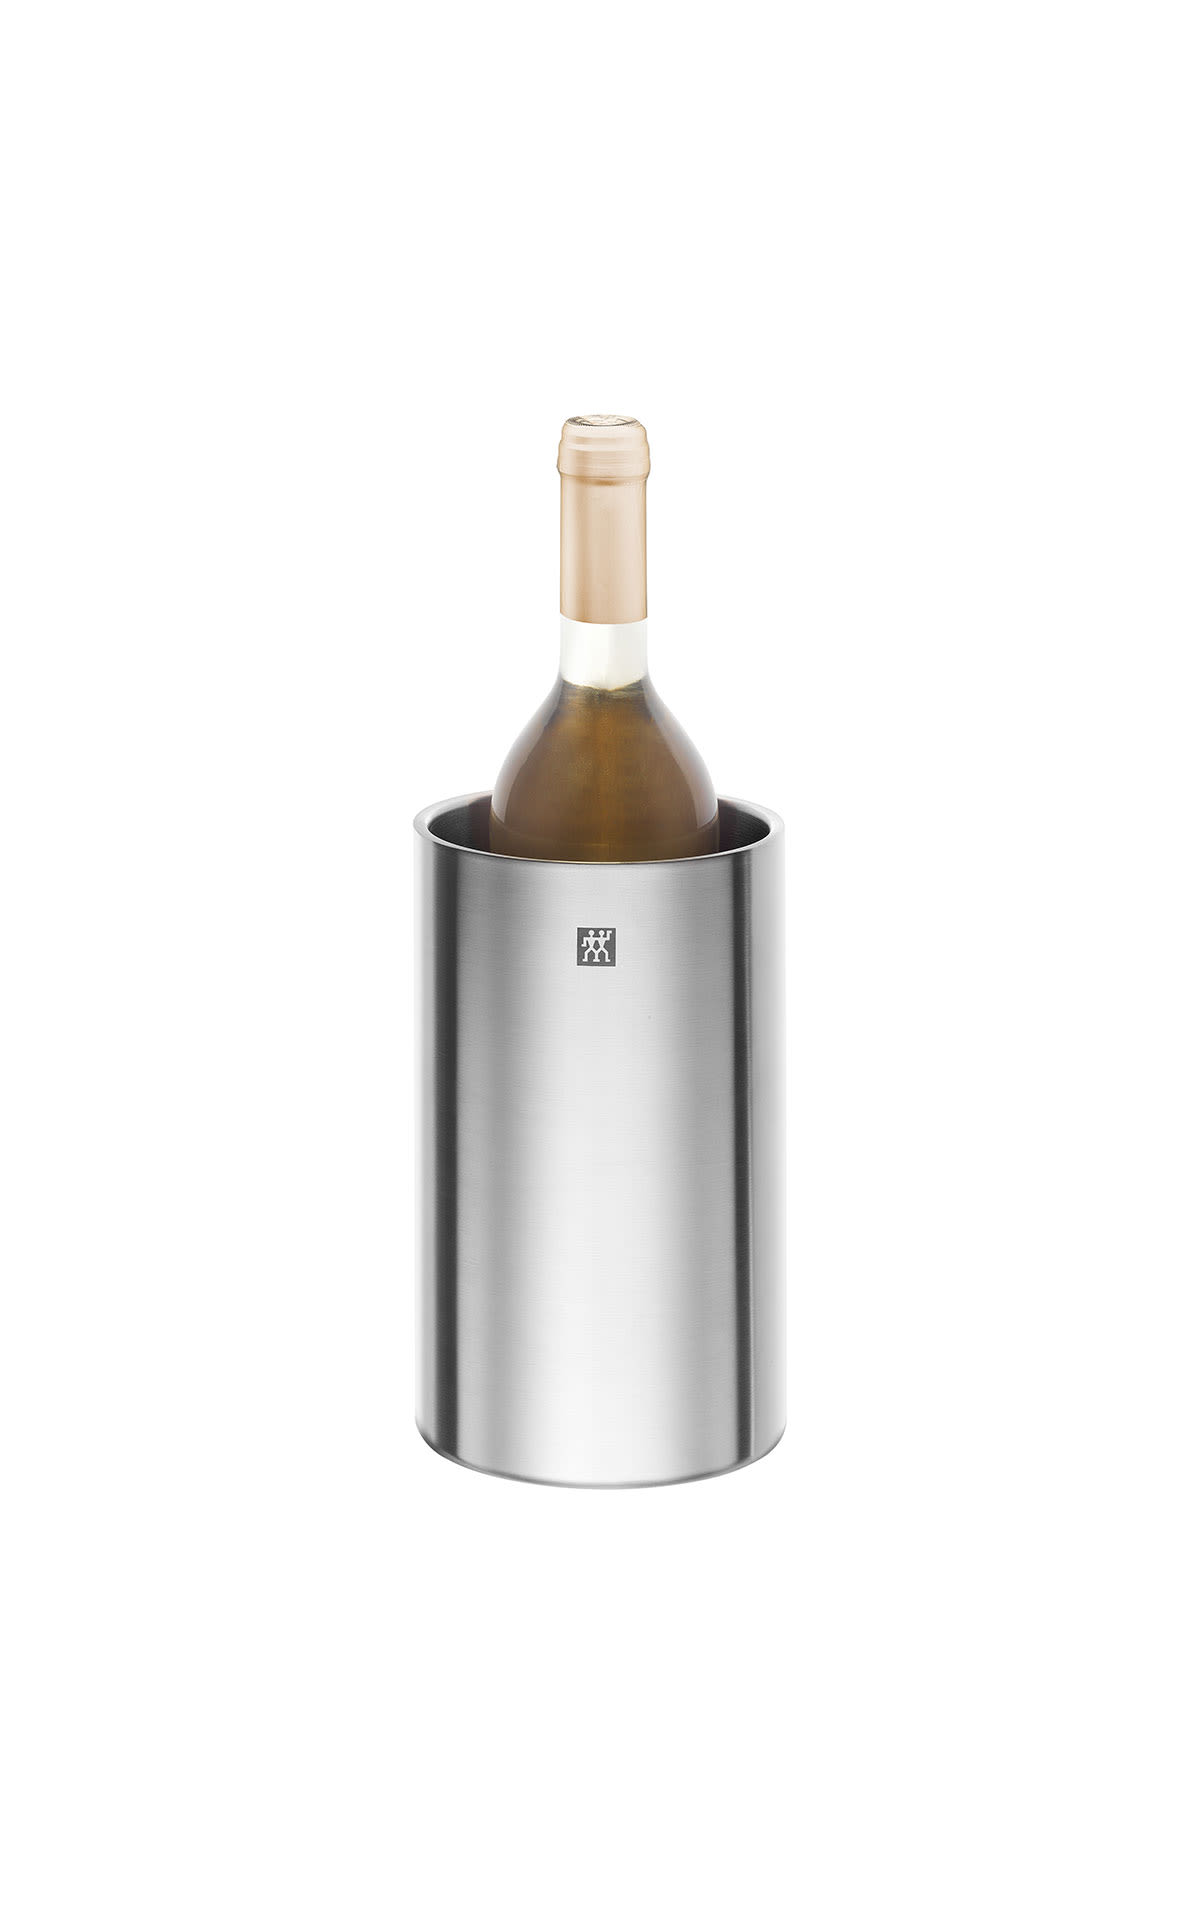 Zwilling Wine cooler from Bicester Village